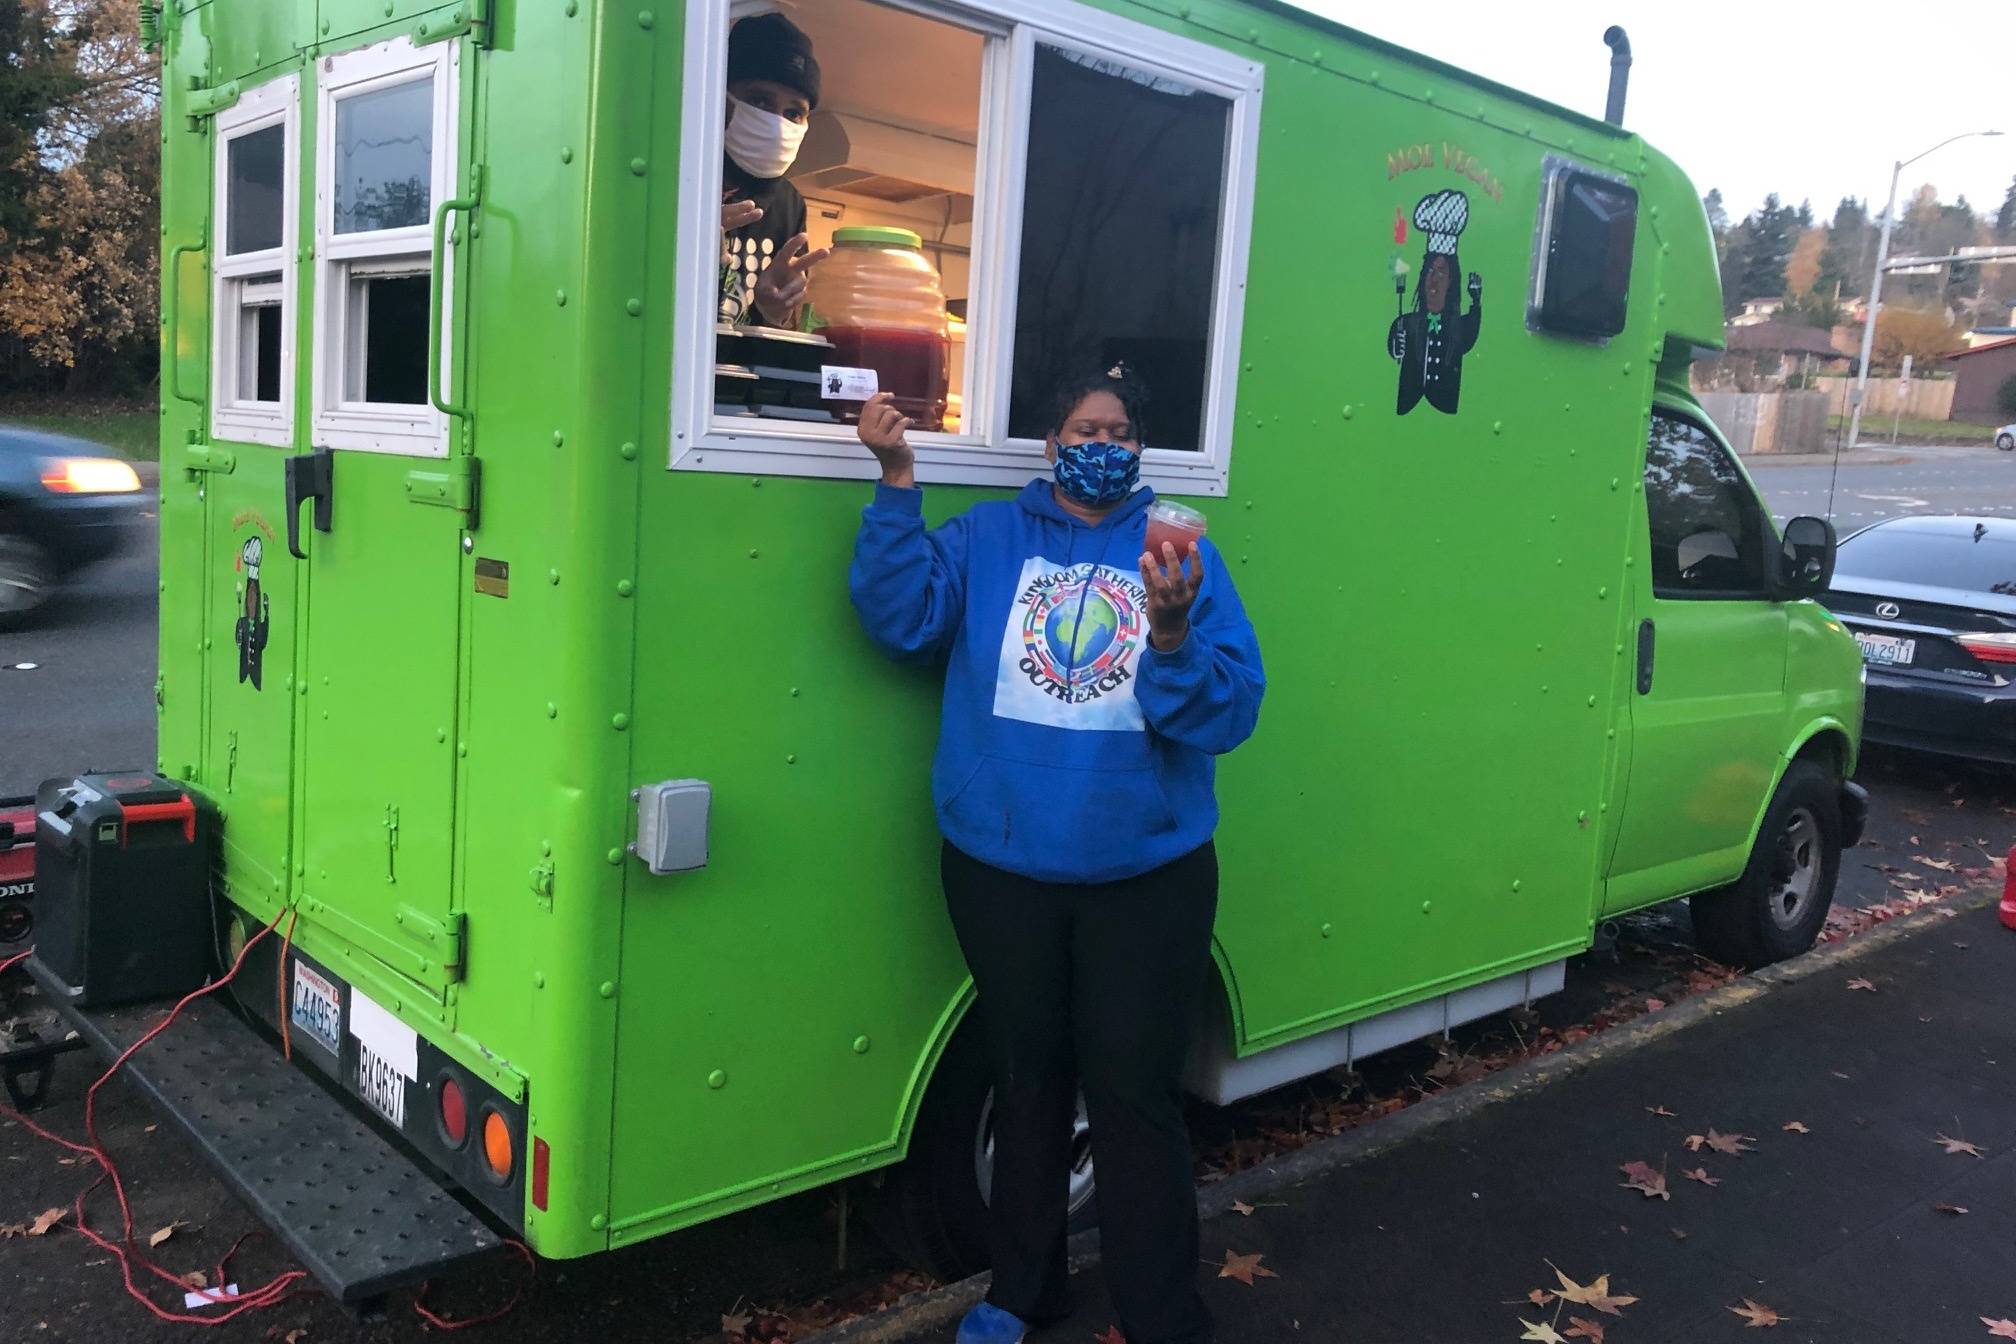 The Moe Vegan food truck serves meals at the city of Kent’s annual Community Thanksgiving Dinner on Nov. 21, 2020. Sound Publishing file photo